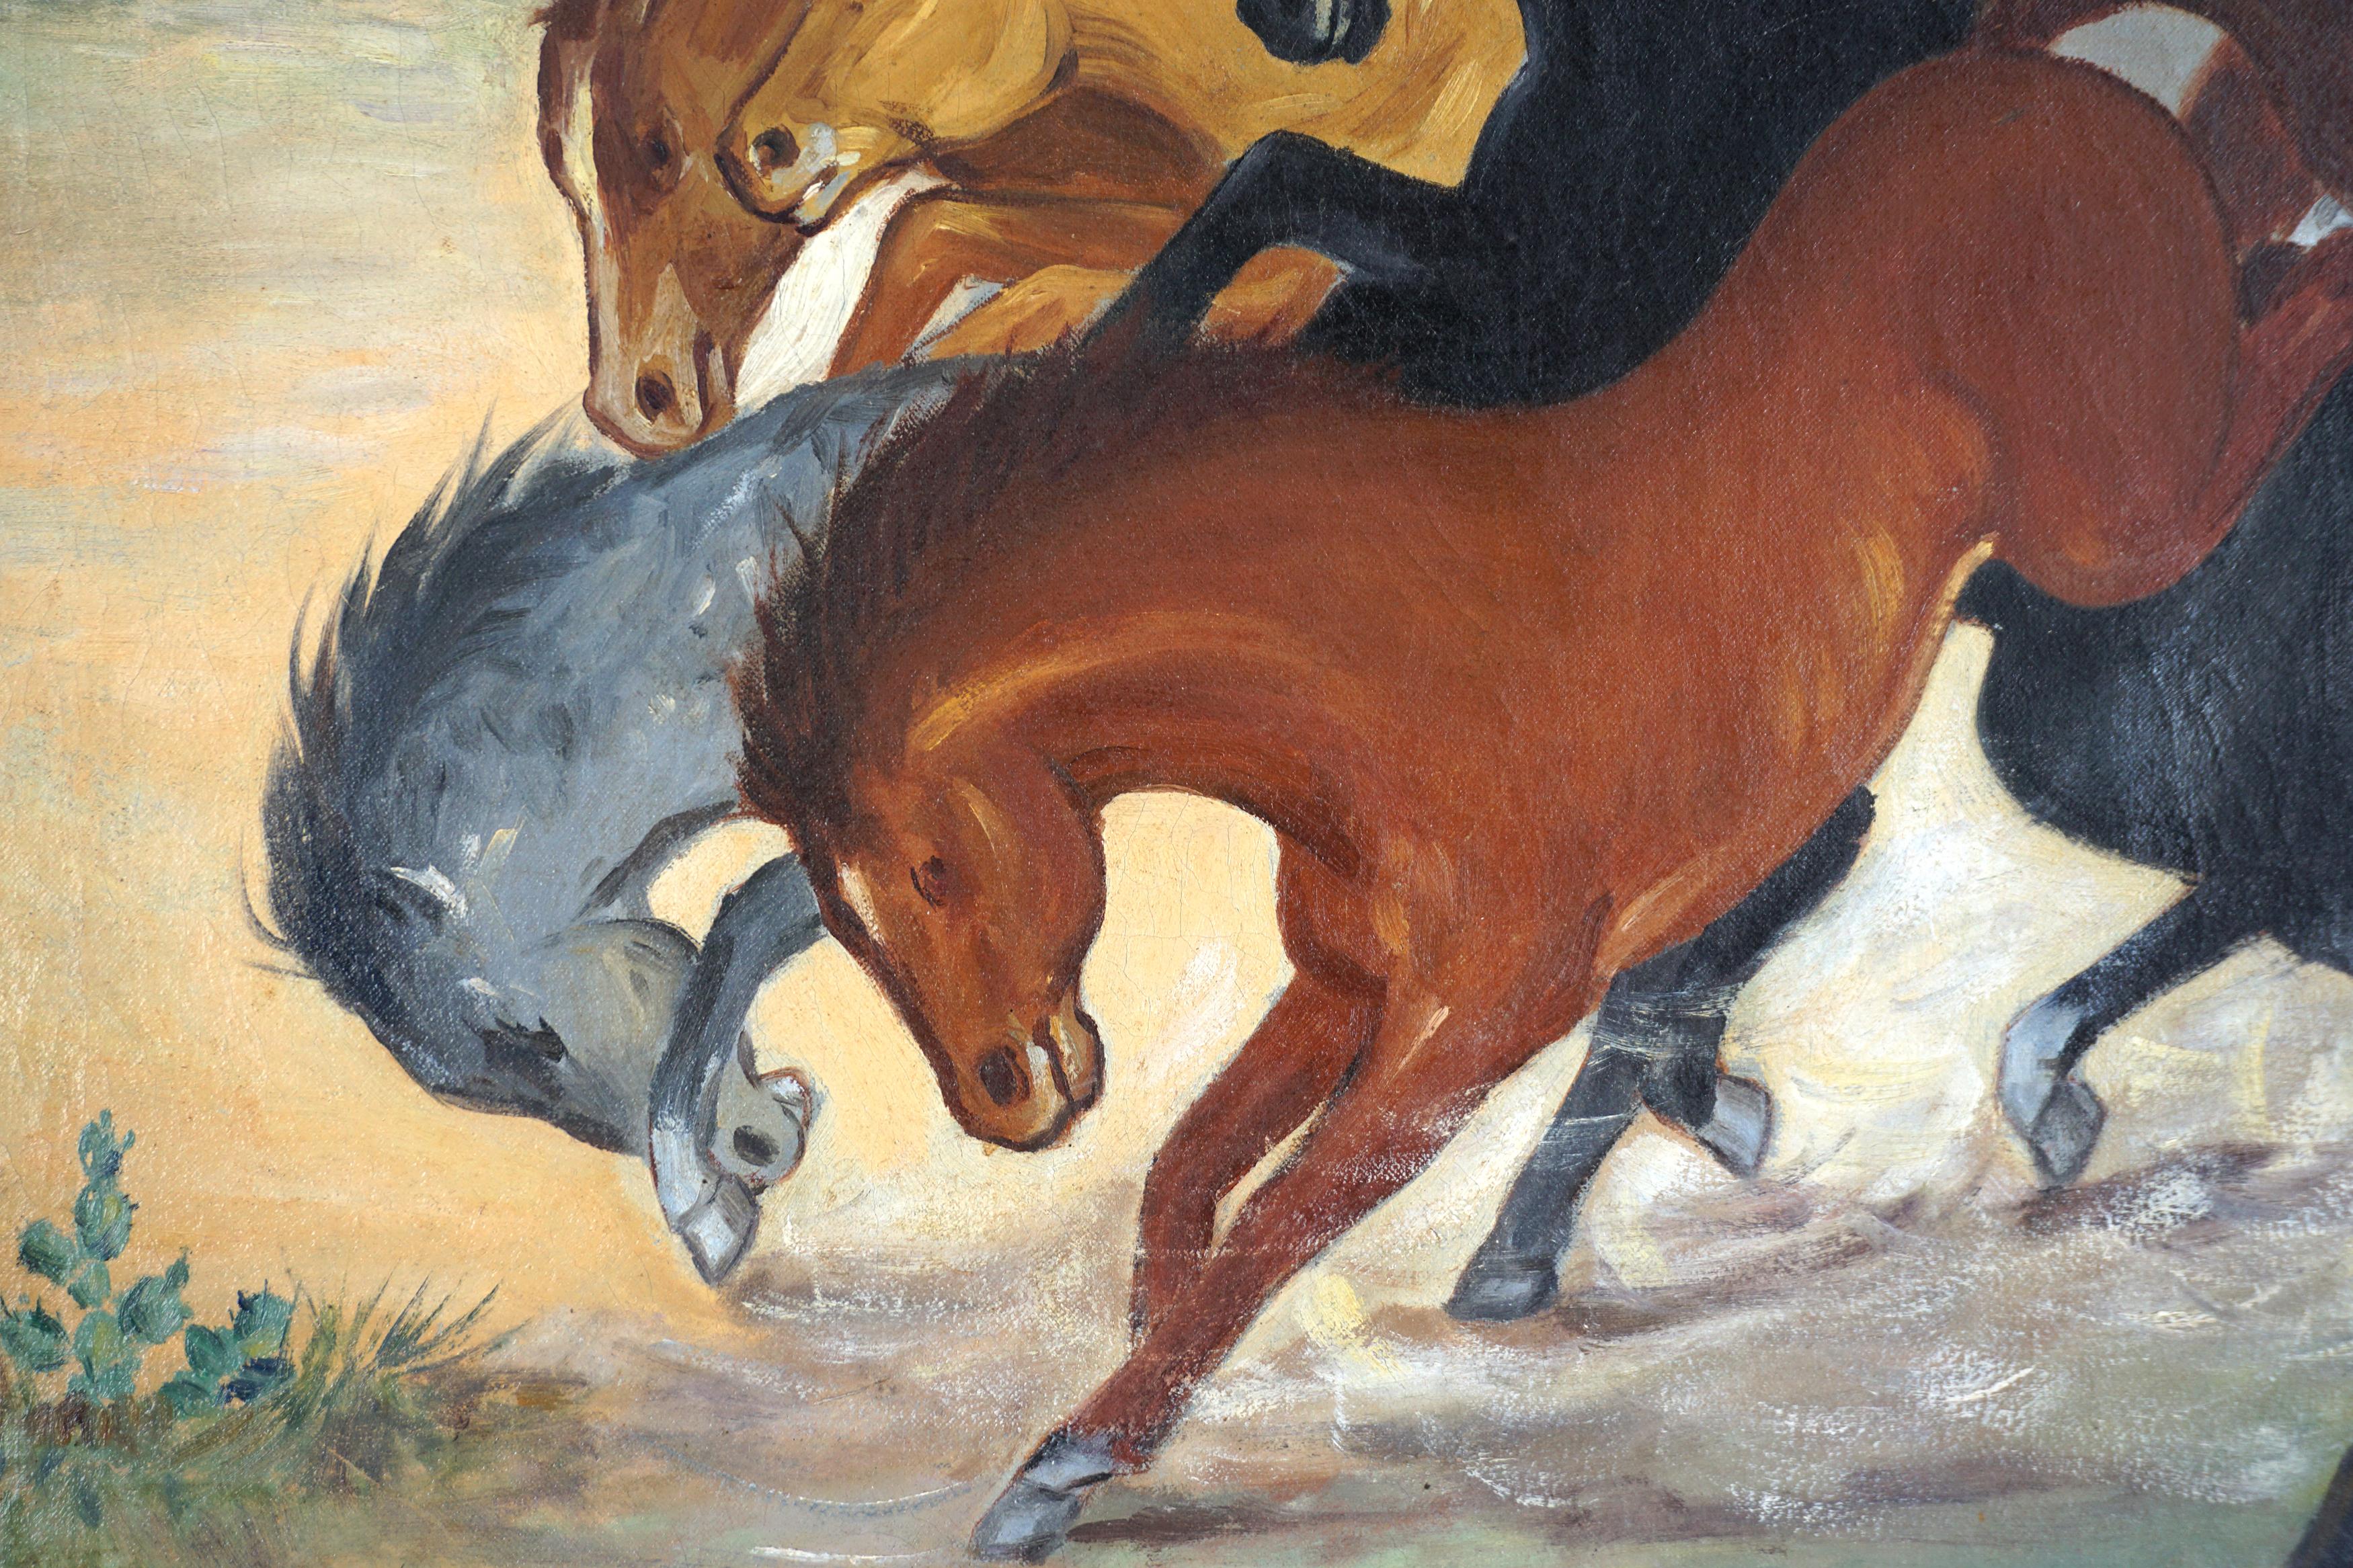 Gorgeous 1950s painting of six horses all different colors running through Grand Canyon in regionalist/Works Progress Administration style. The sand being kicked up by the horses adds to the kinetic and dramatic feel of the piece. Faint remnants of